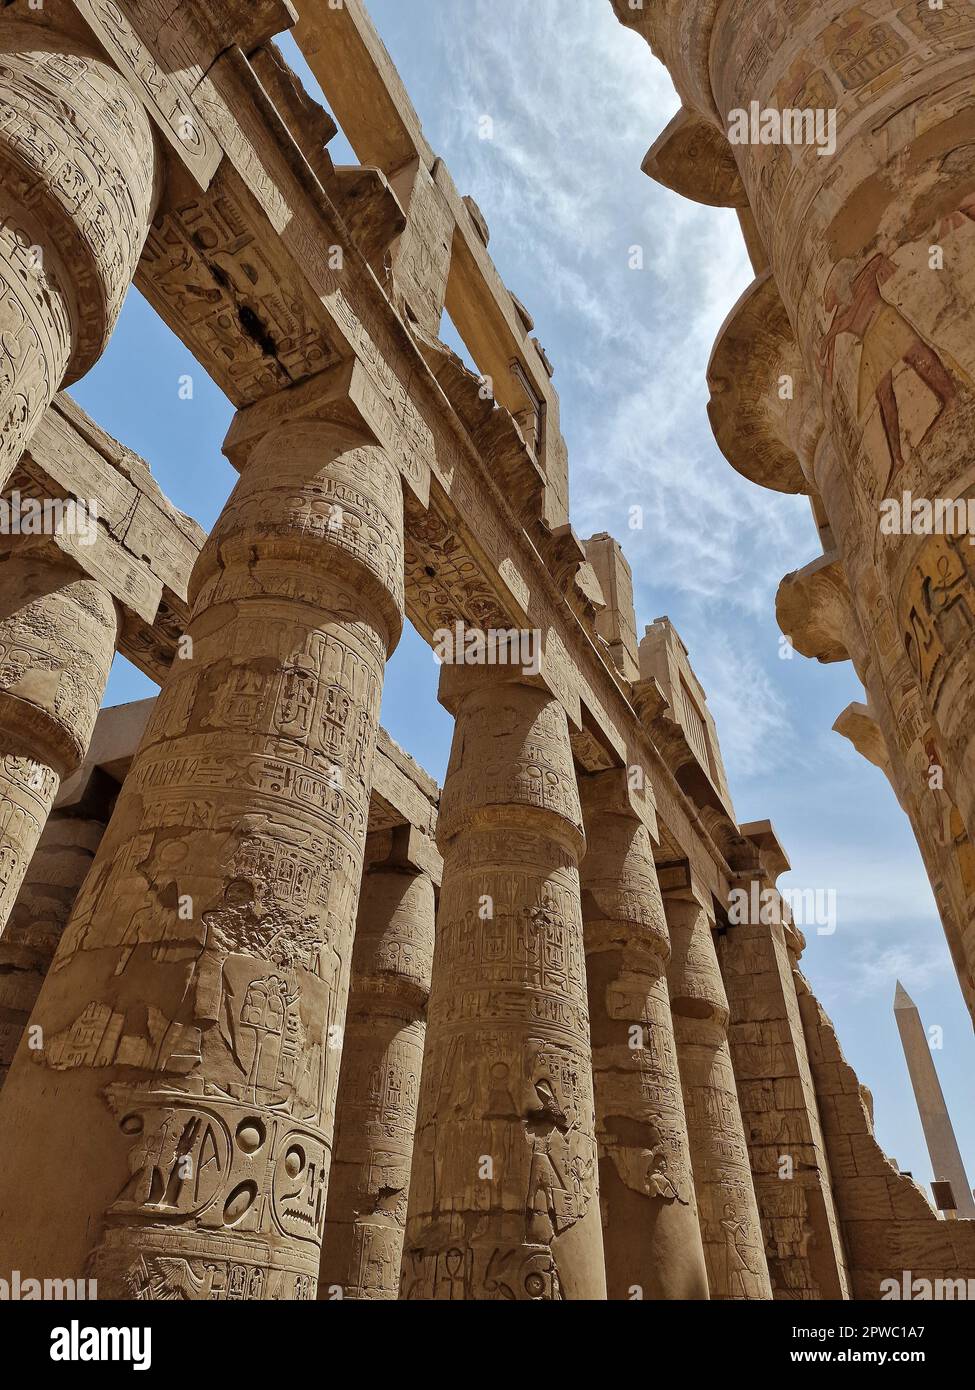 The Great Hypostyle Hall and clouds at the Temples of Karnak (ancient Thebes). Luxor, Egypt Stock Photo